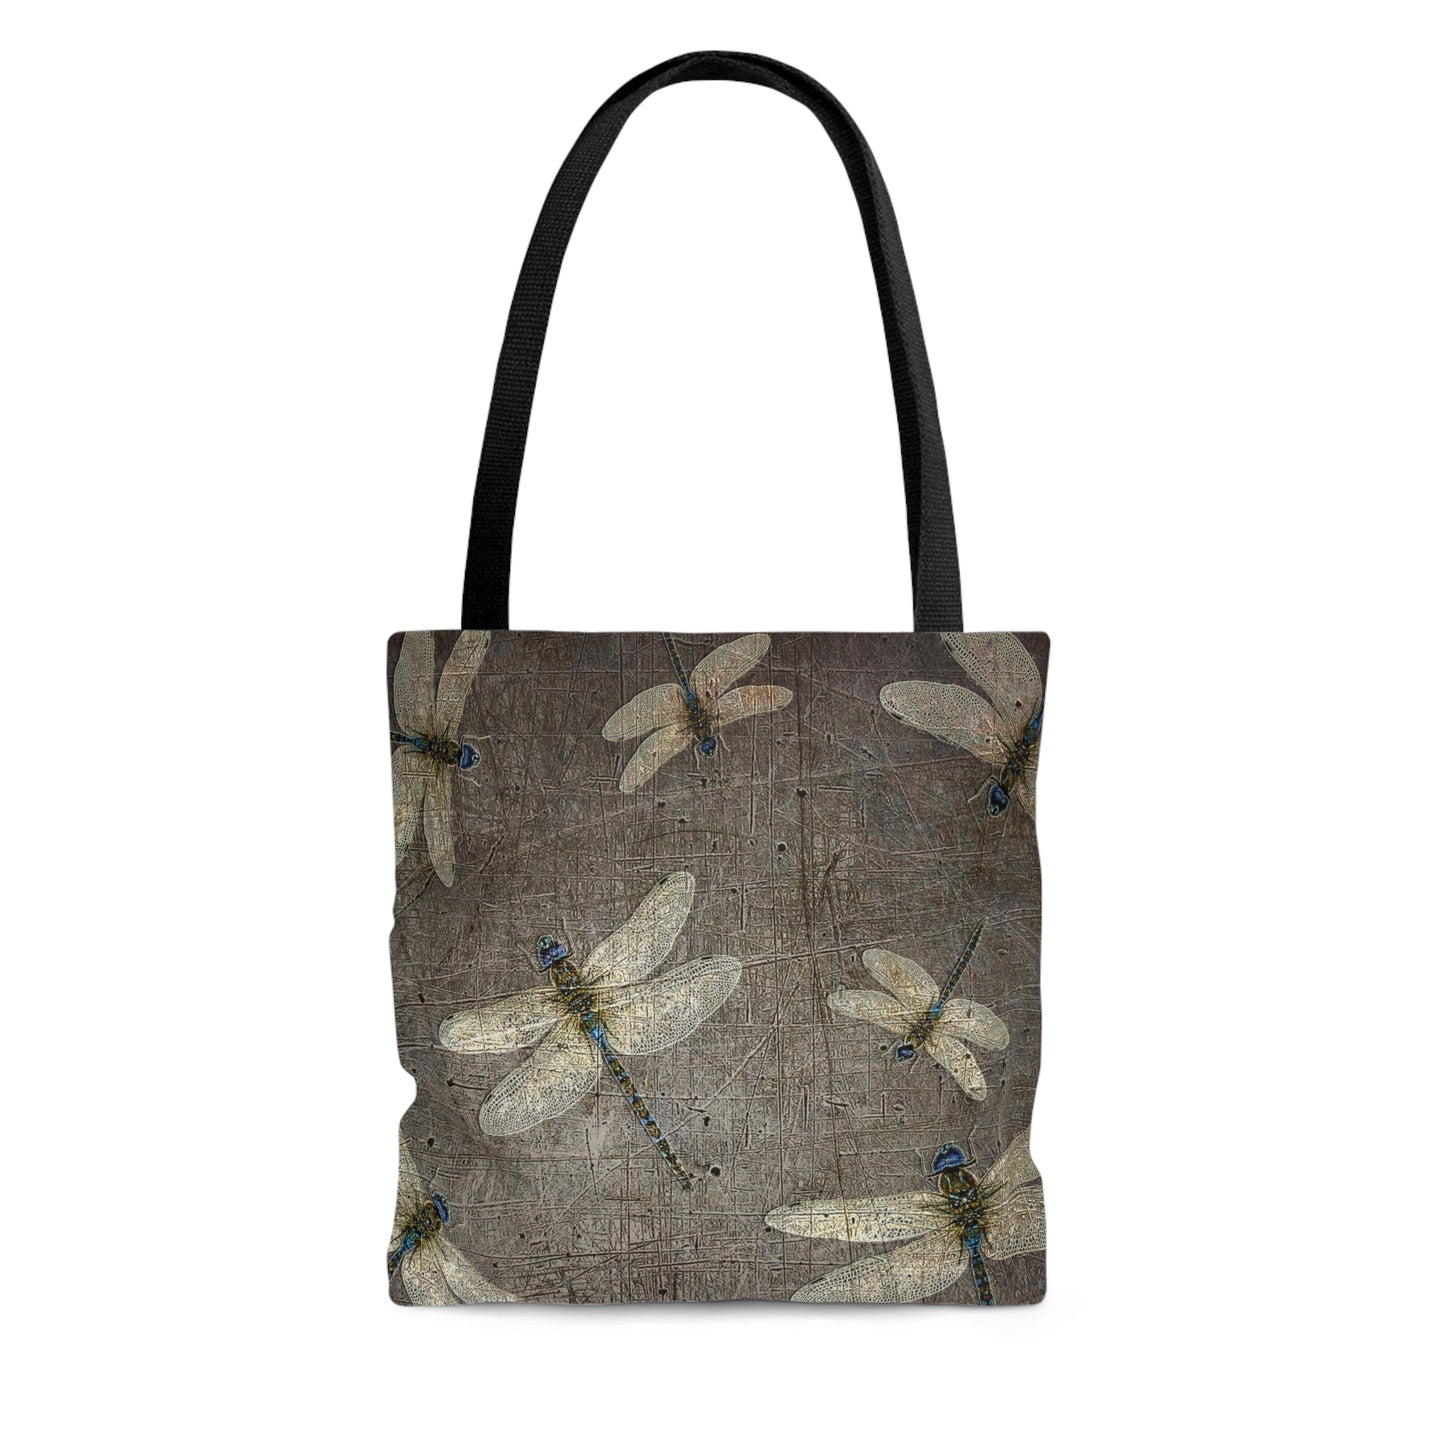 Flight of Dragonflies on Distressed Gray Stone Printed on Tote Bag small back